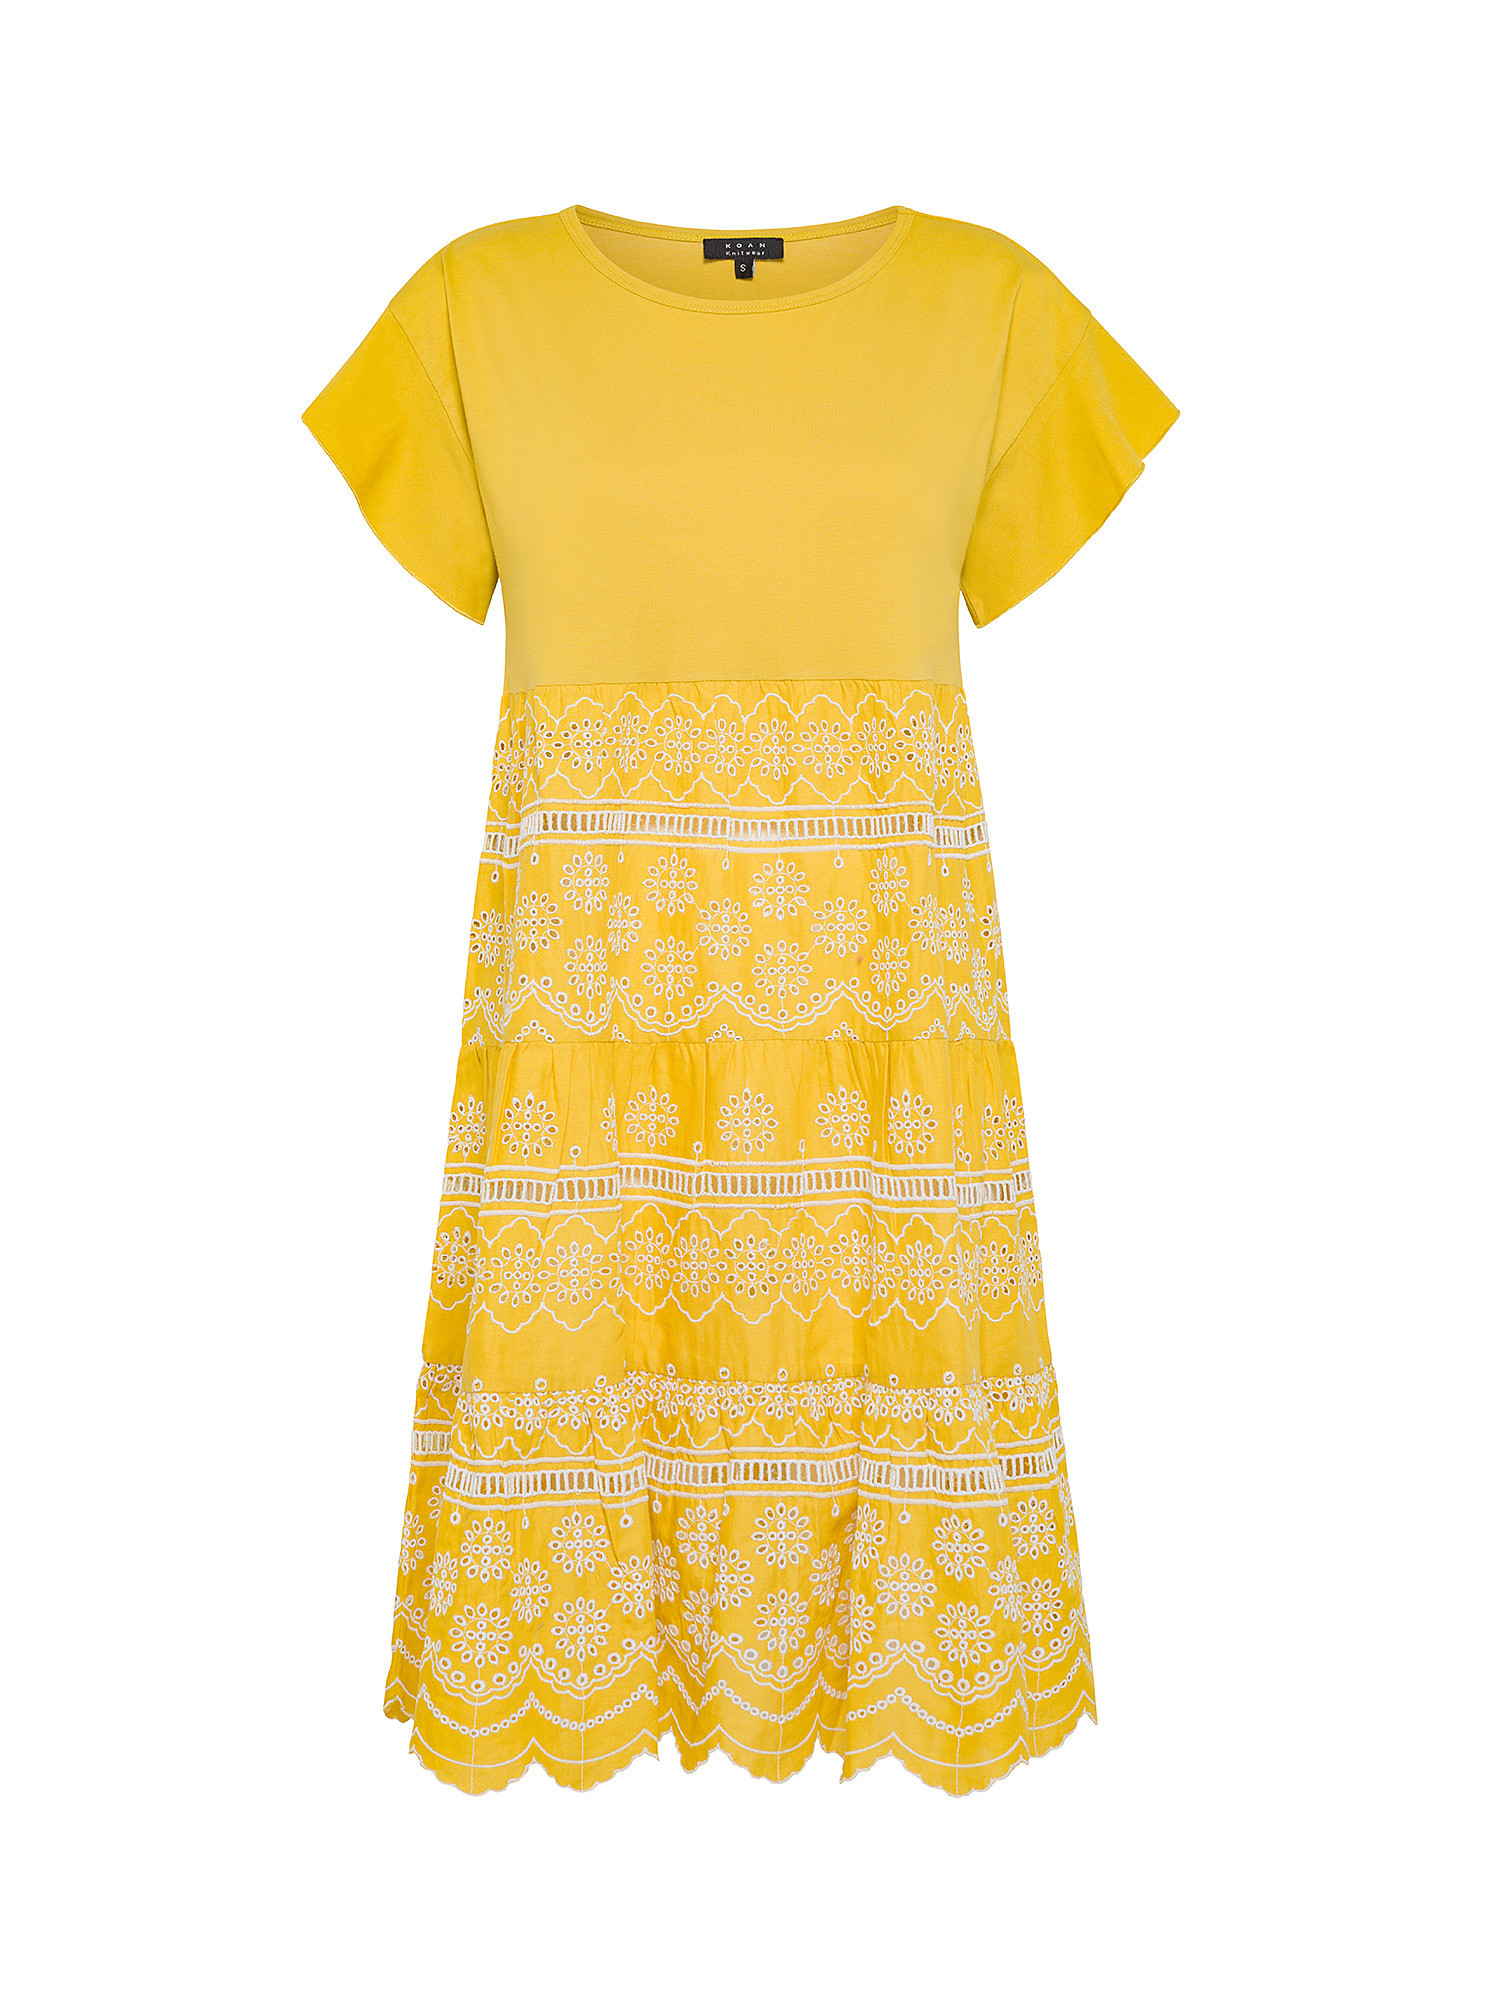 Koan - Cotton dress with flounces, Yellow, large image number 0